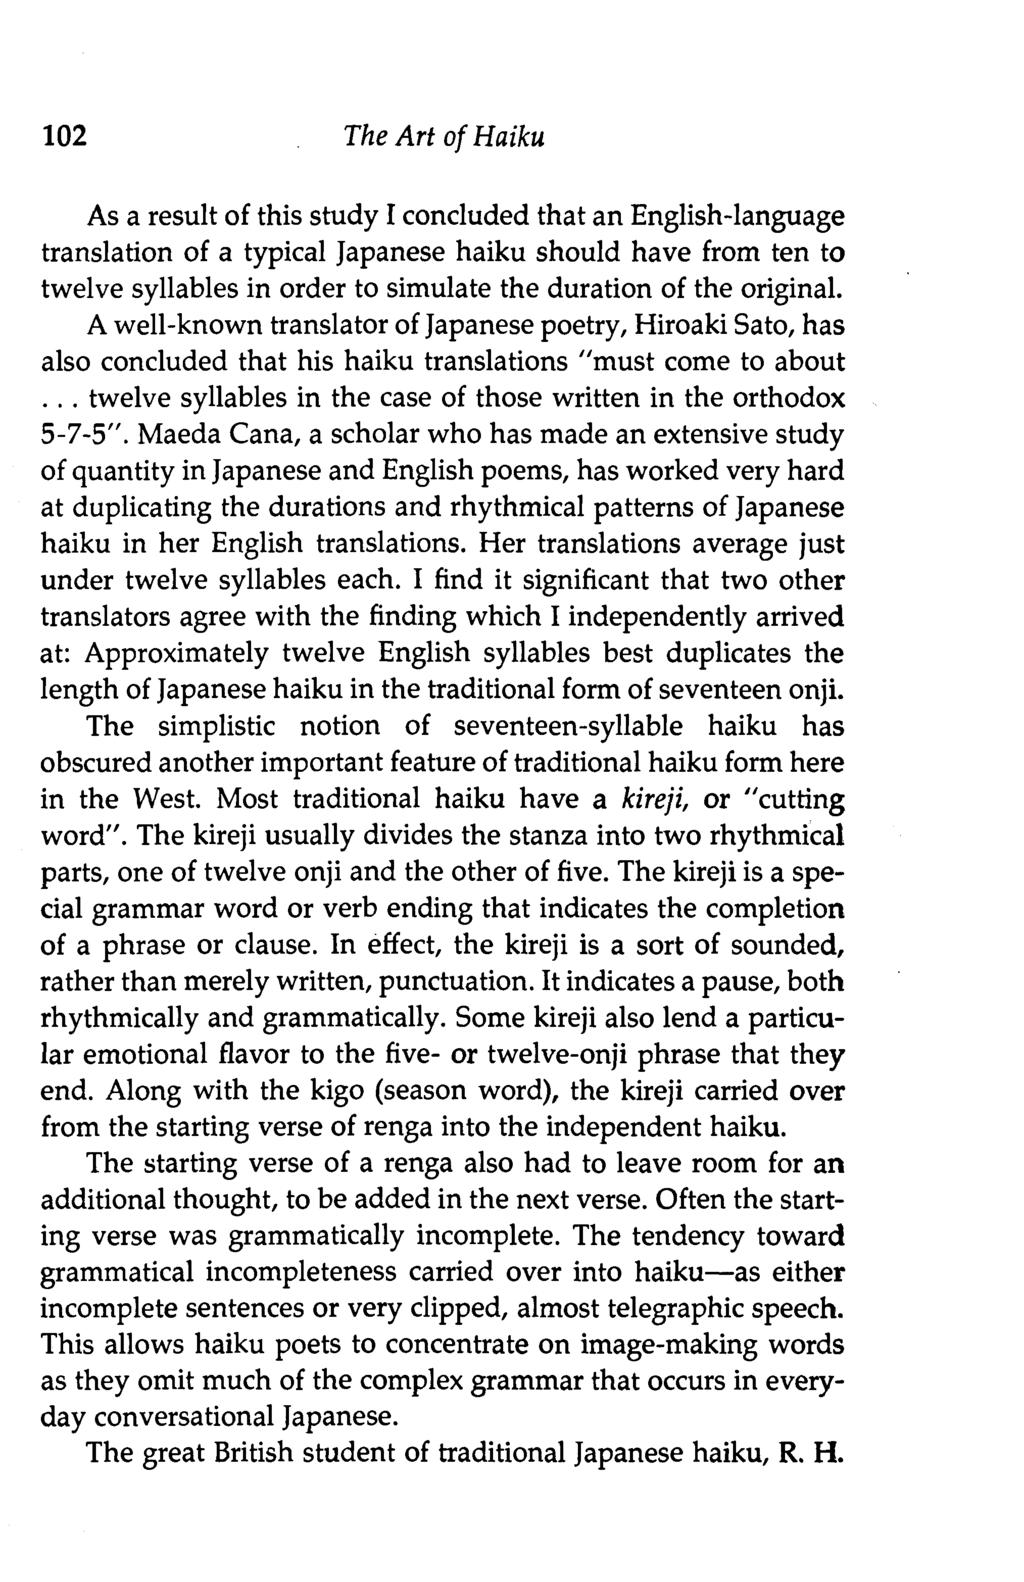 102 The Art of Haiku As a result of this study I concluded that an English-language translation of a typical Japanese haiku should have from ten to twelve syllables in order to simulate the duration